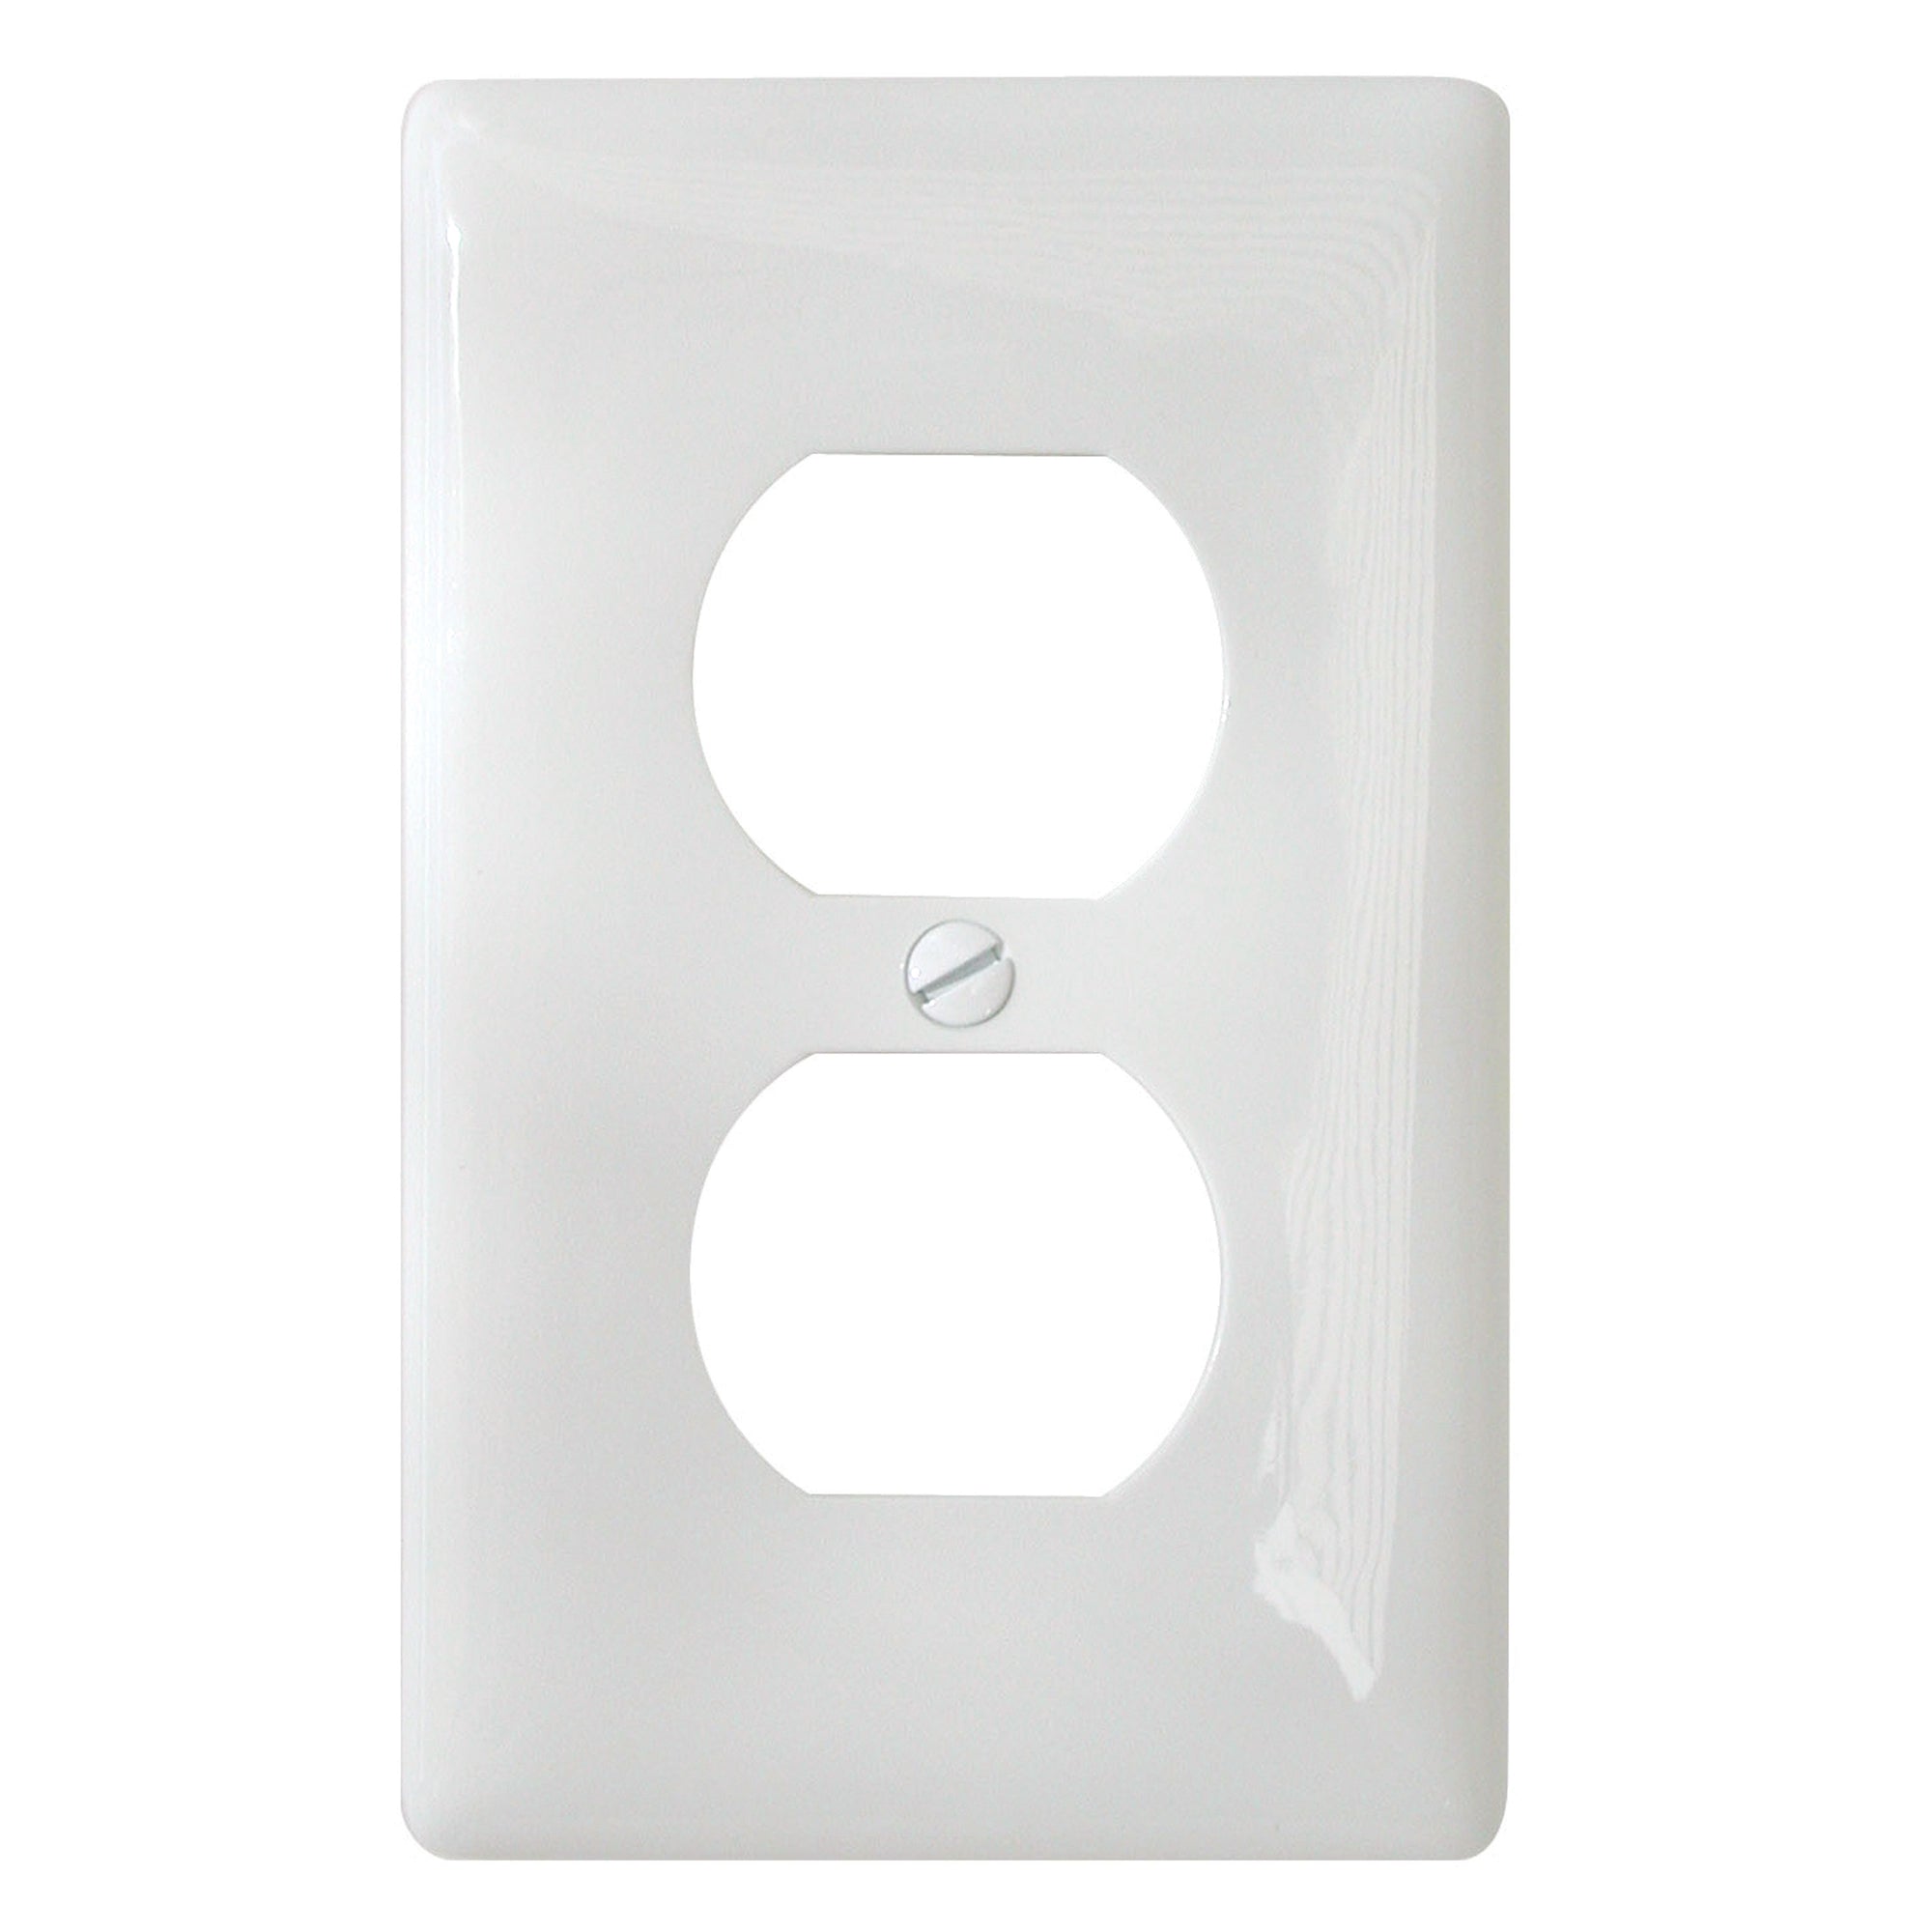 Diamond Group by Valterra DG32VP Toggle Switch Cover - White